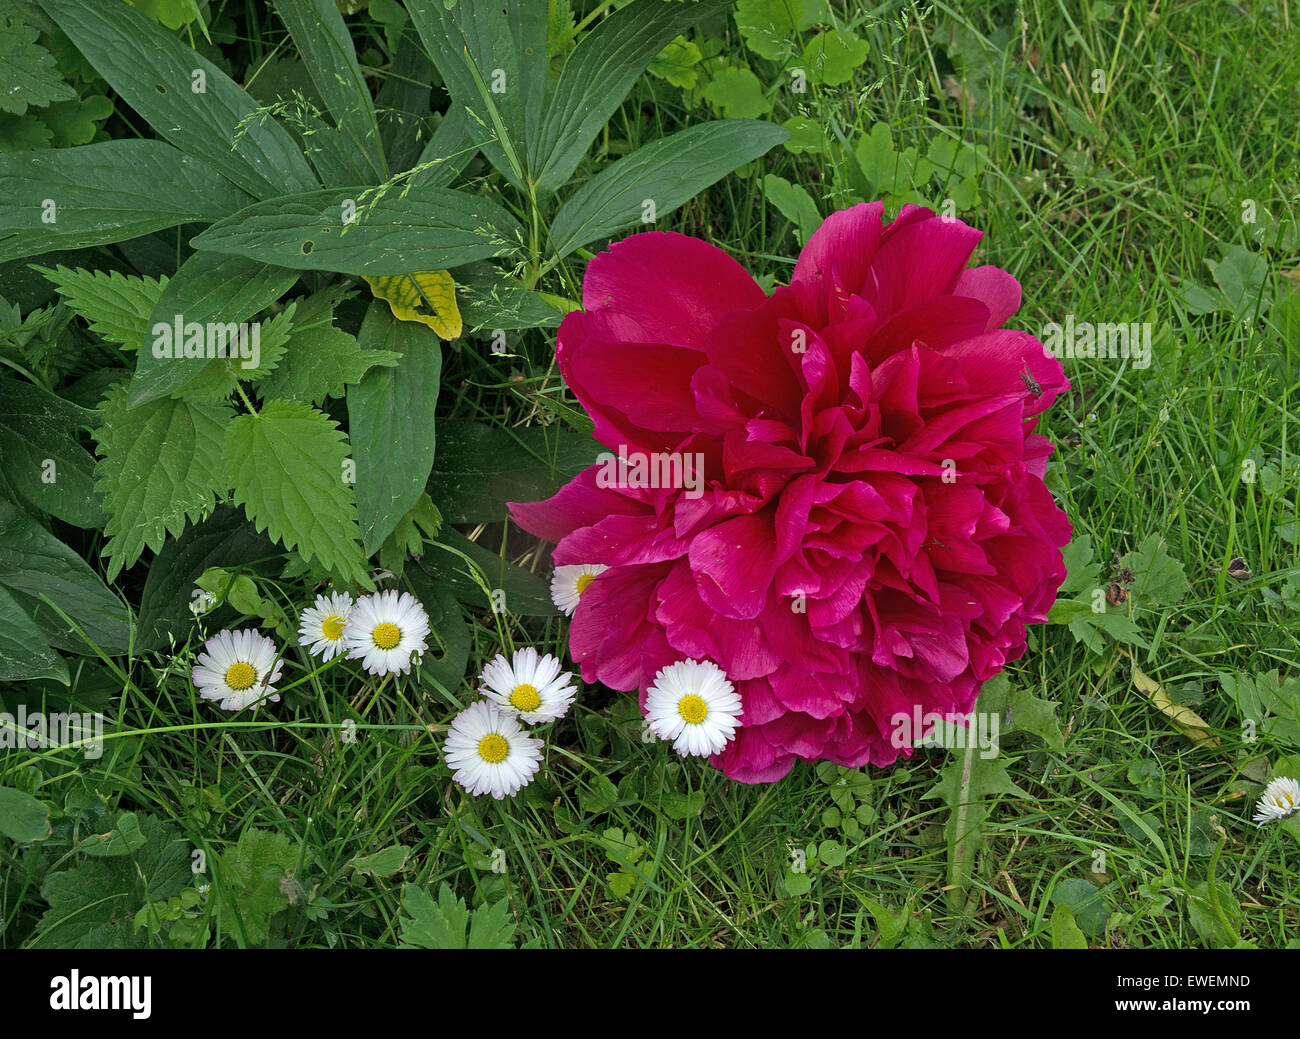 Red peonies white daisies growing in garden with green grass and white daisies, Sweden in June. Stock Photo